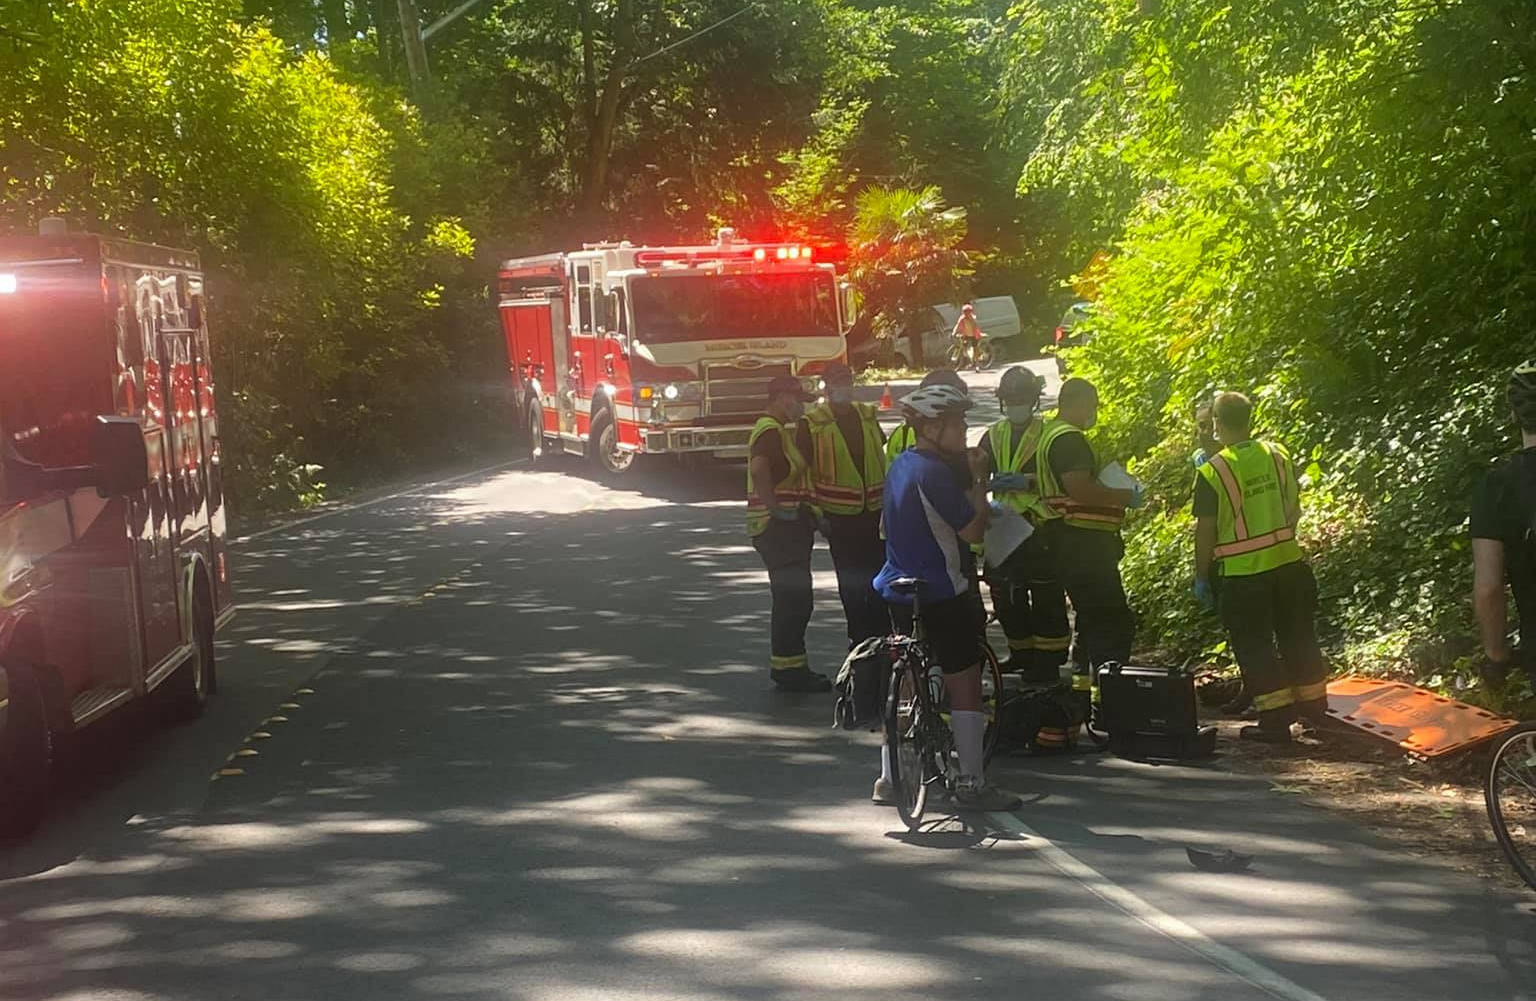 A cyclist sustained minor injuries after being struck by a vehicle on June 19 in the 4300 block of East Mercer Way, according to the Mercer Island police and fire departments. The vehicle sped from the scene after the incident. While examining vehicle debris evidence, police identified the suspect’s vehicle as a black 2014-2016 Mazda 3. “Many people, bicyclists and vehicles reported this vehicle driving recklessly, even on the freeway at one point,” police noted. Police are asking anyone with information to call 425-577-5656. Photo courtesy of the Mercer Island Police Department